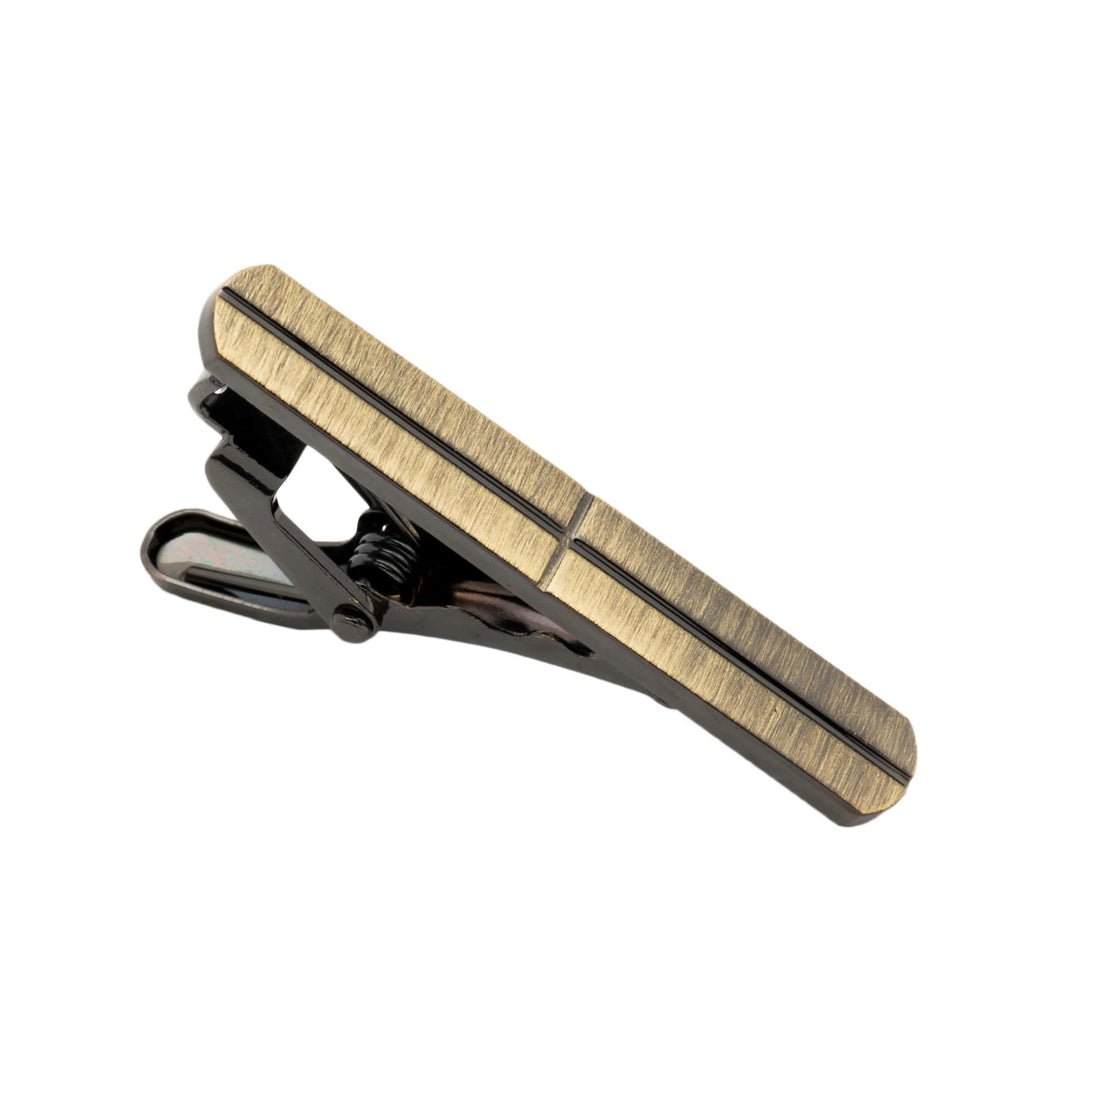 Copper Stainless Steel Tie Bar